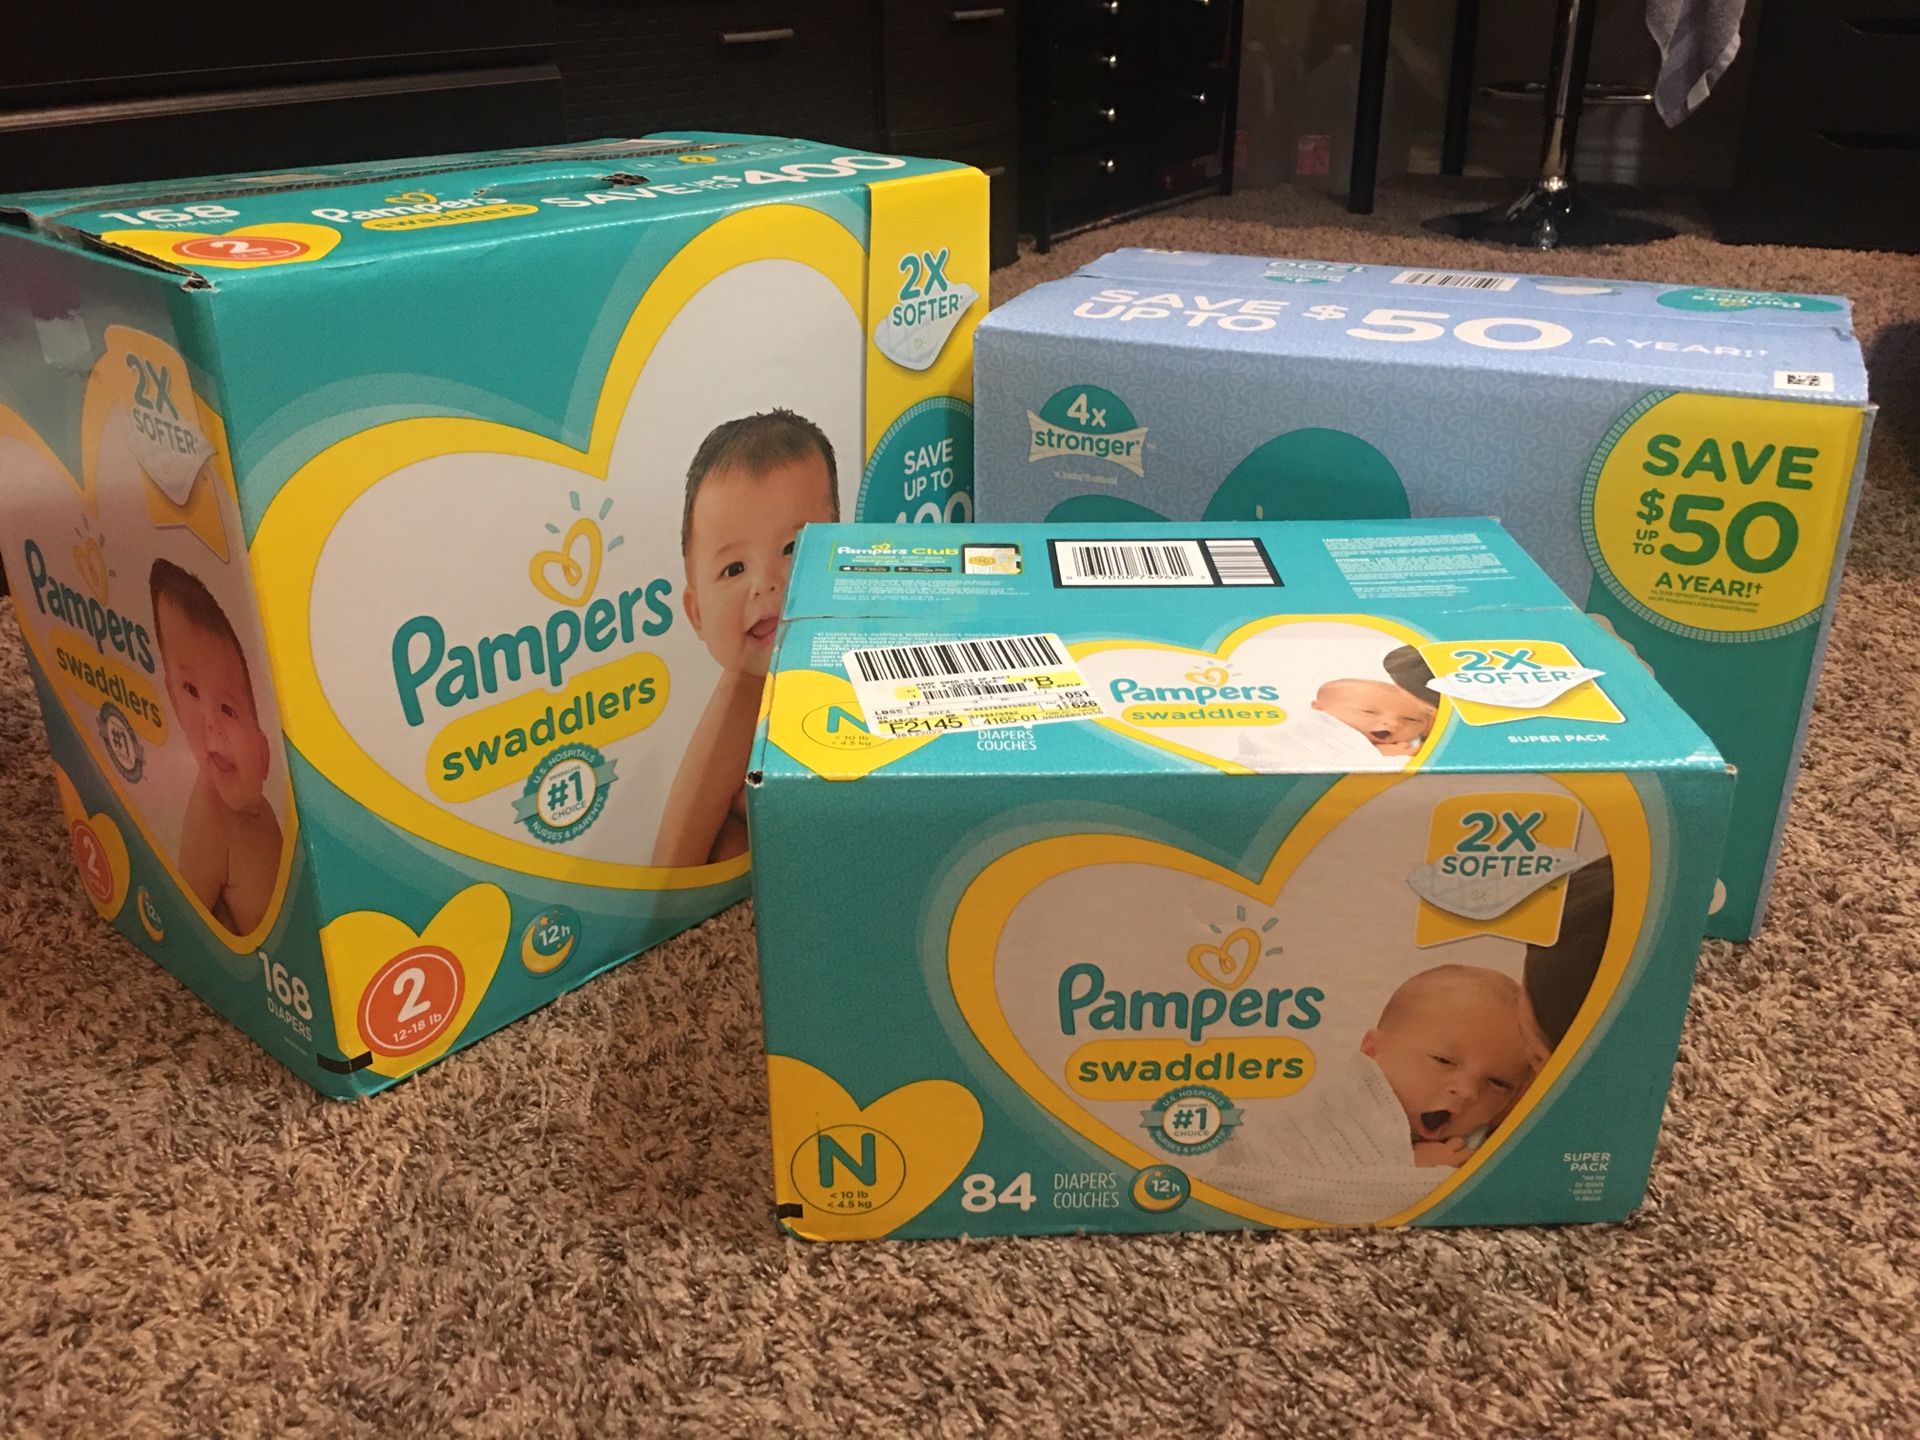 Pampers Diapers and Wipes